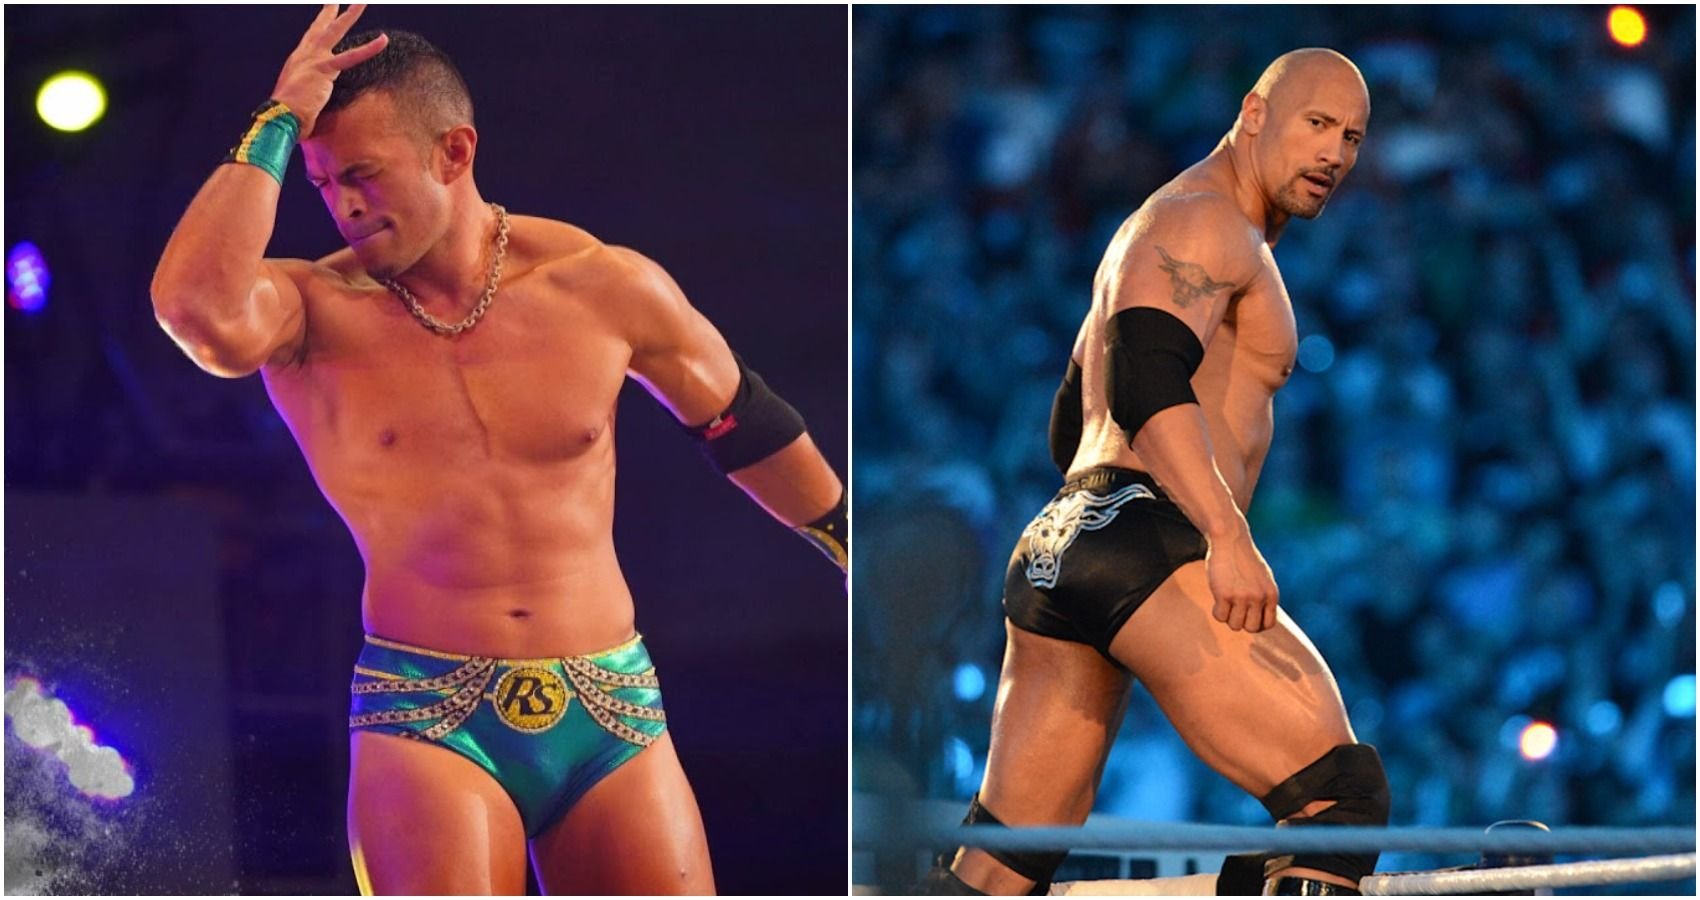 10 Wrestlers You'll Love If The Rock Is Your All-Time Favorite